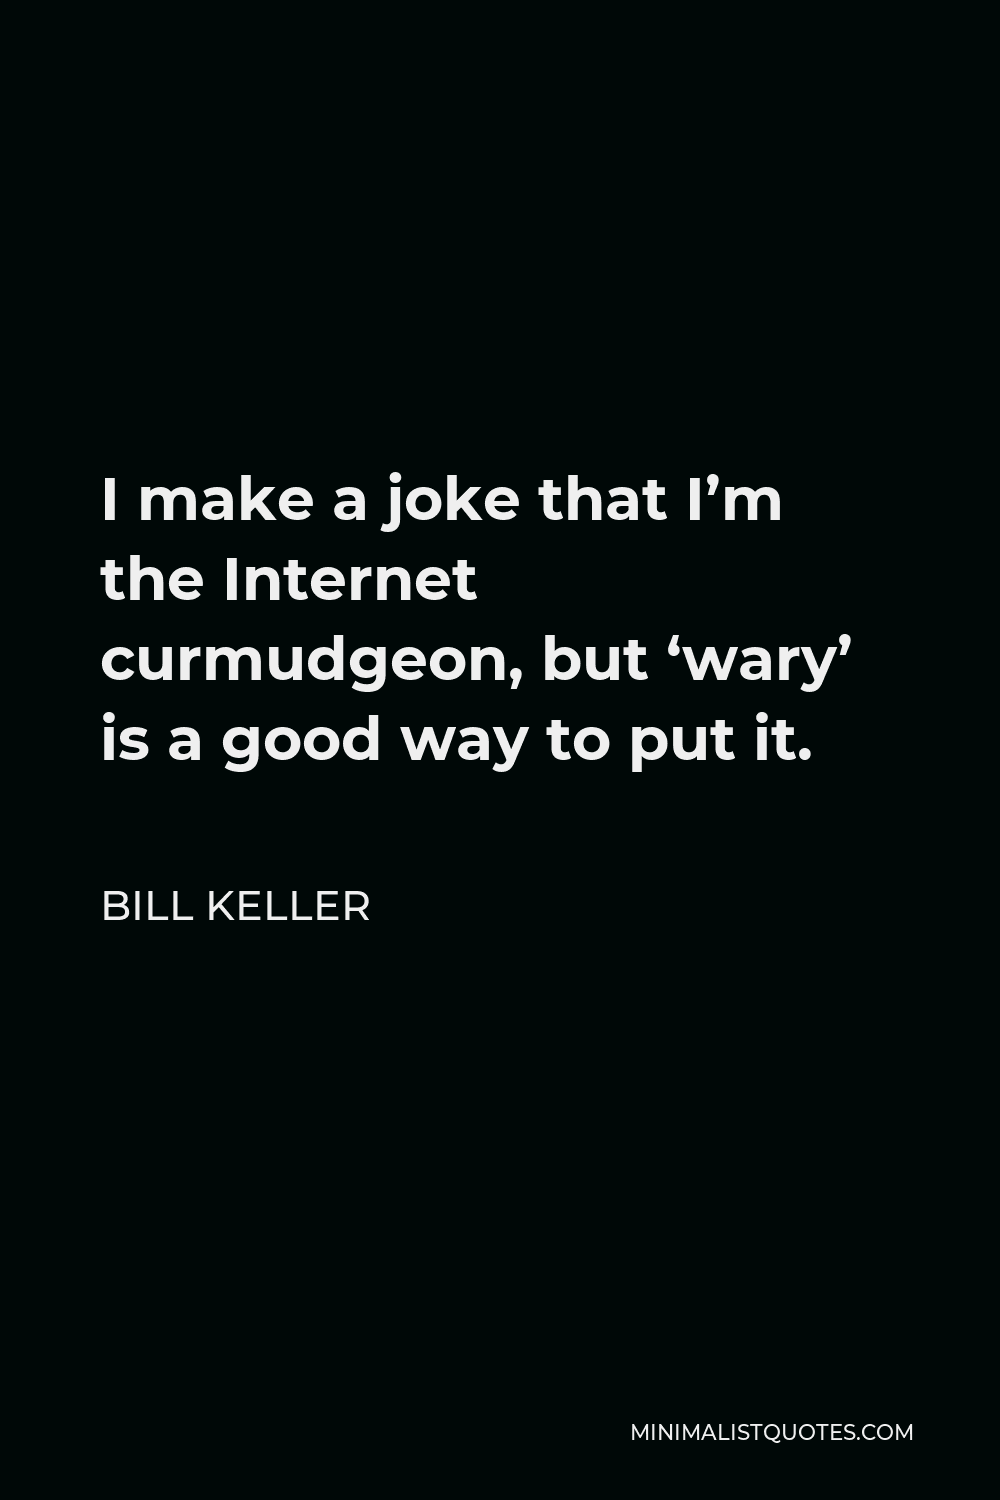 Bill Keller Quote - I make a joke that I’m the Internet curmudgeon, but ‘wary’ is a good way to put it.